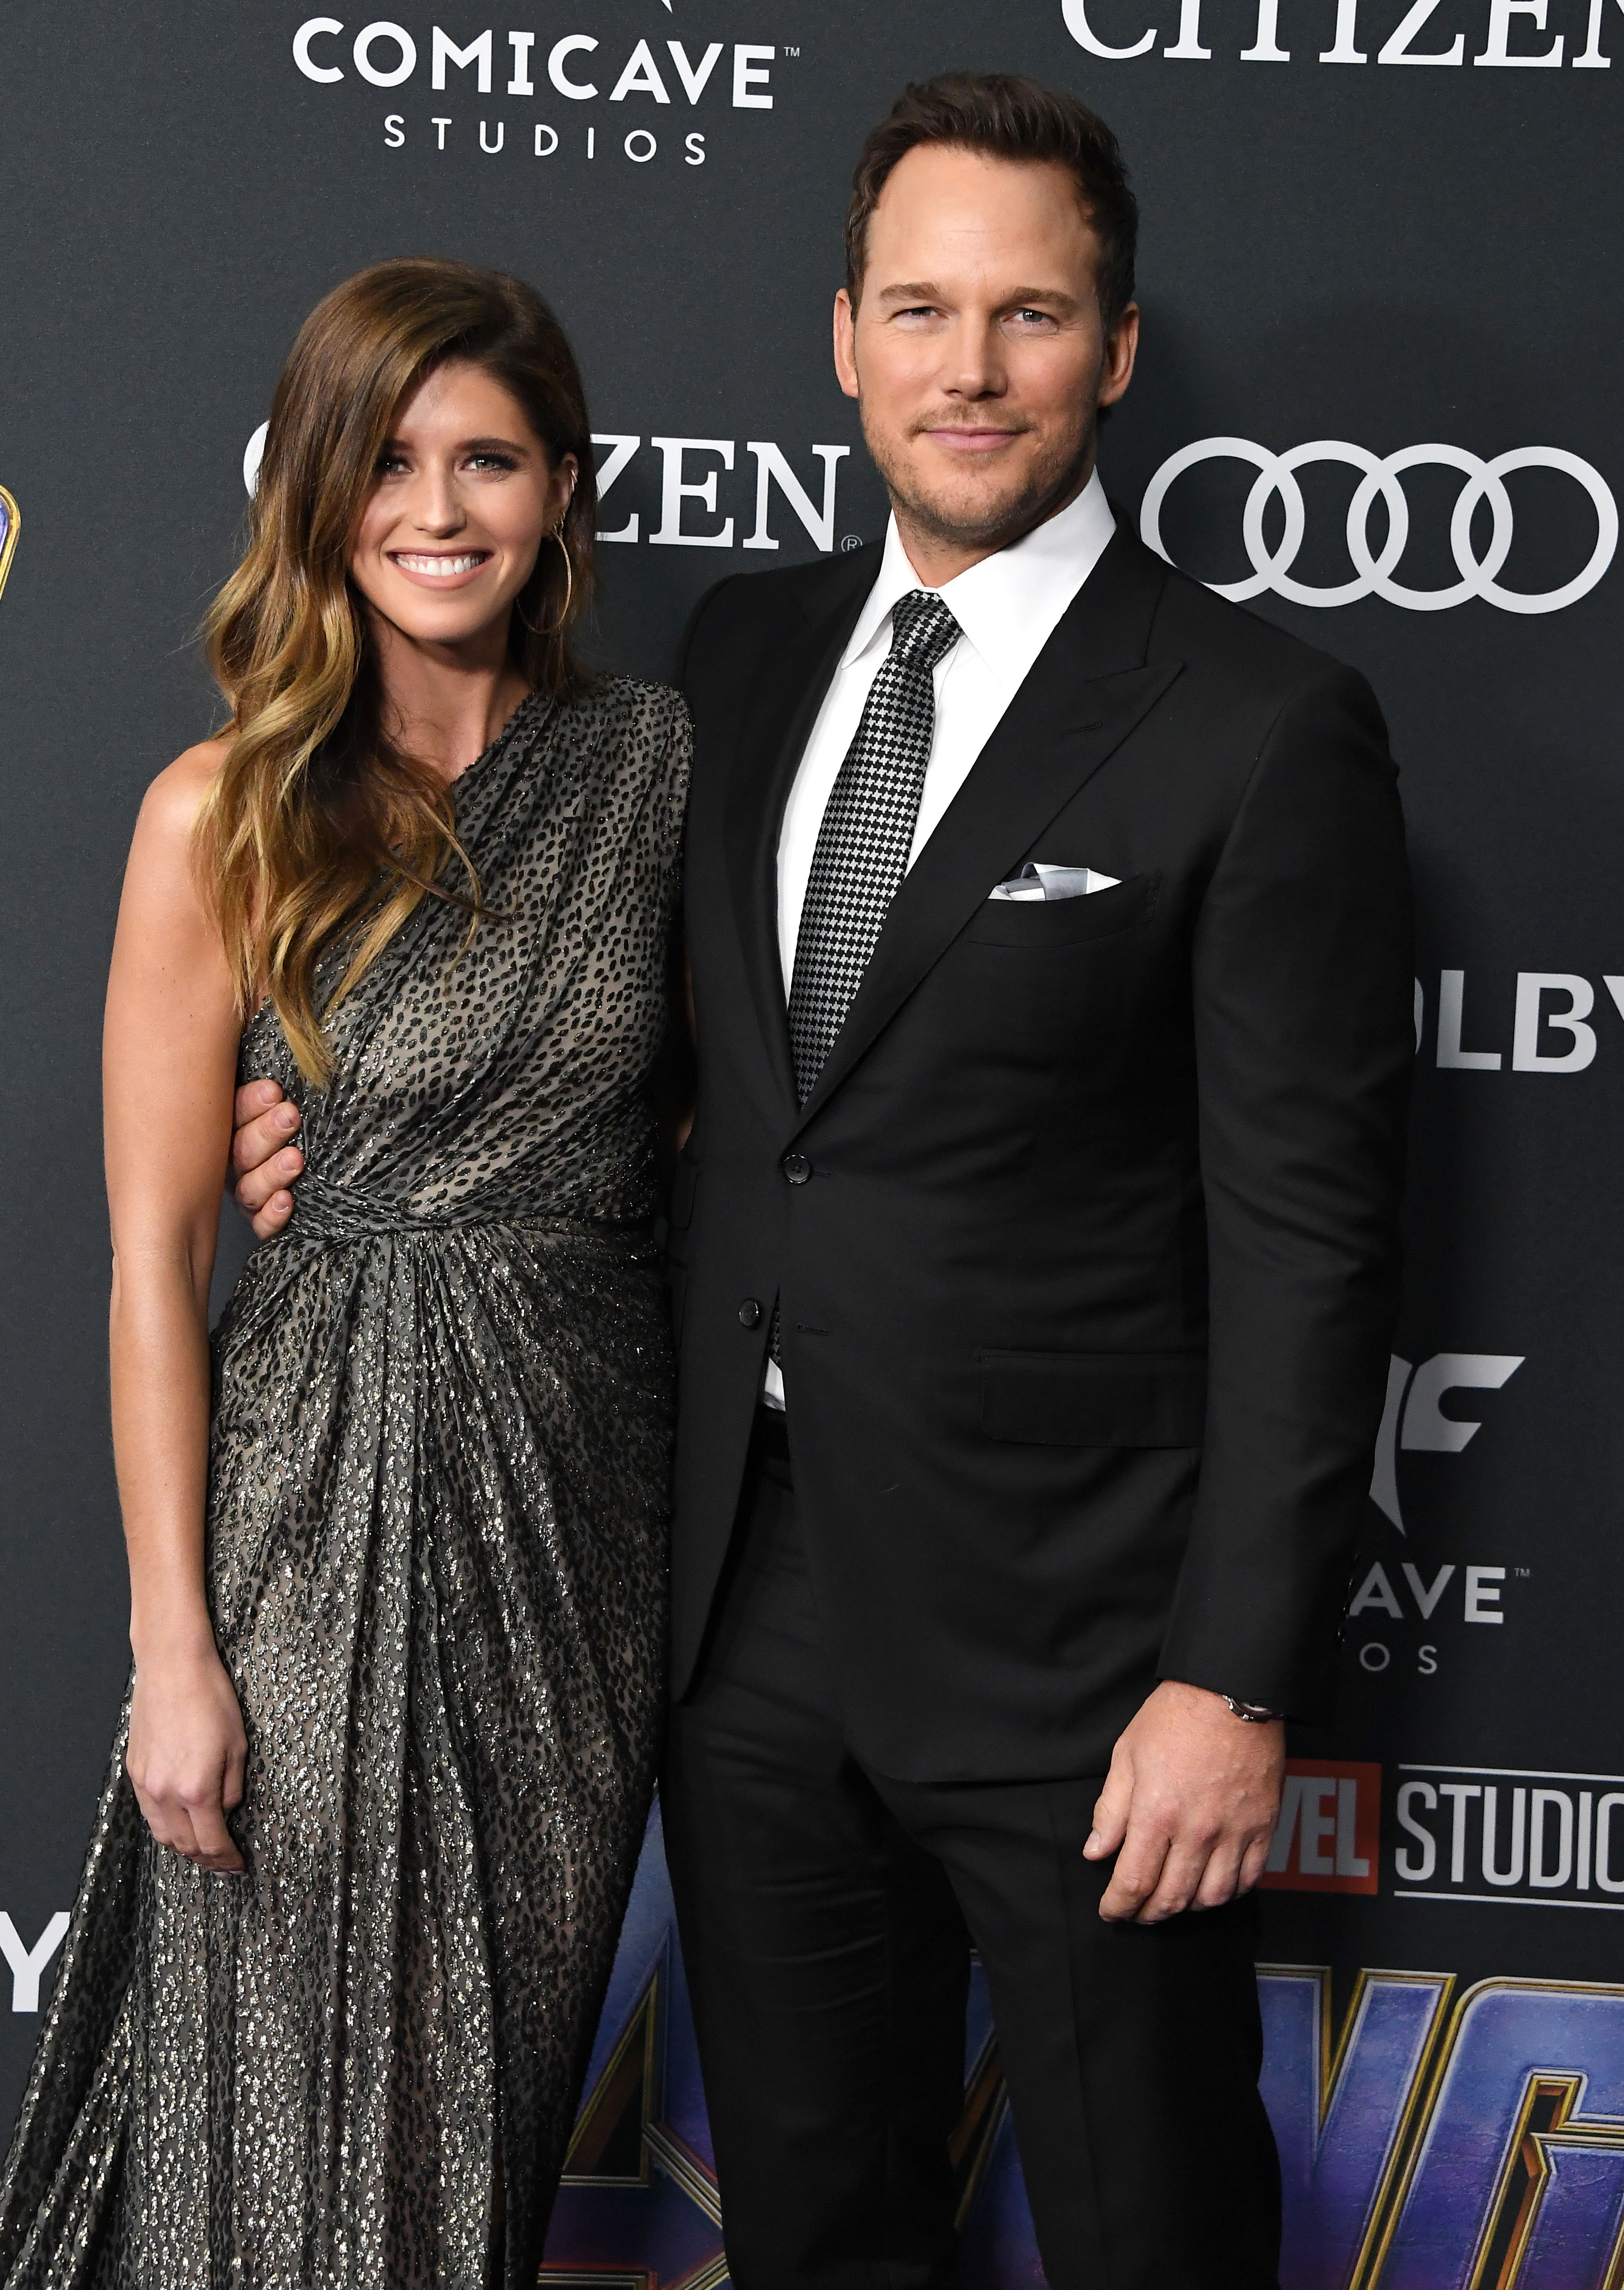 Katherine Schwarzenegger and Chris Pratt arrives at the world premiere Of Walt Disney Studios Motion Pictures "Avengers: Endgame" at Los Angeles Convention Center on April 22, 2019 in Los Angeles, California. | Source: Getty Images